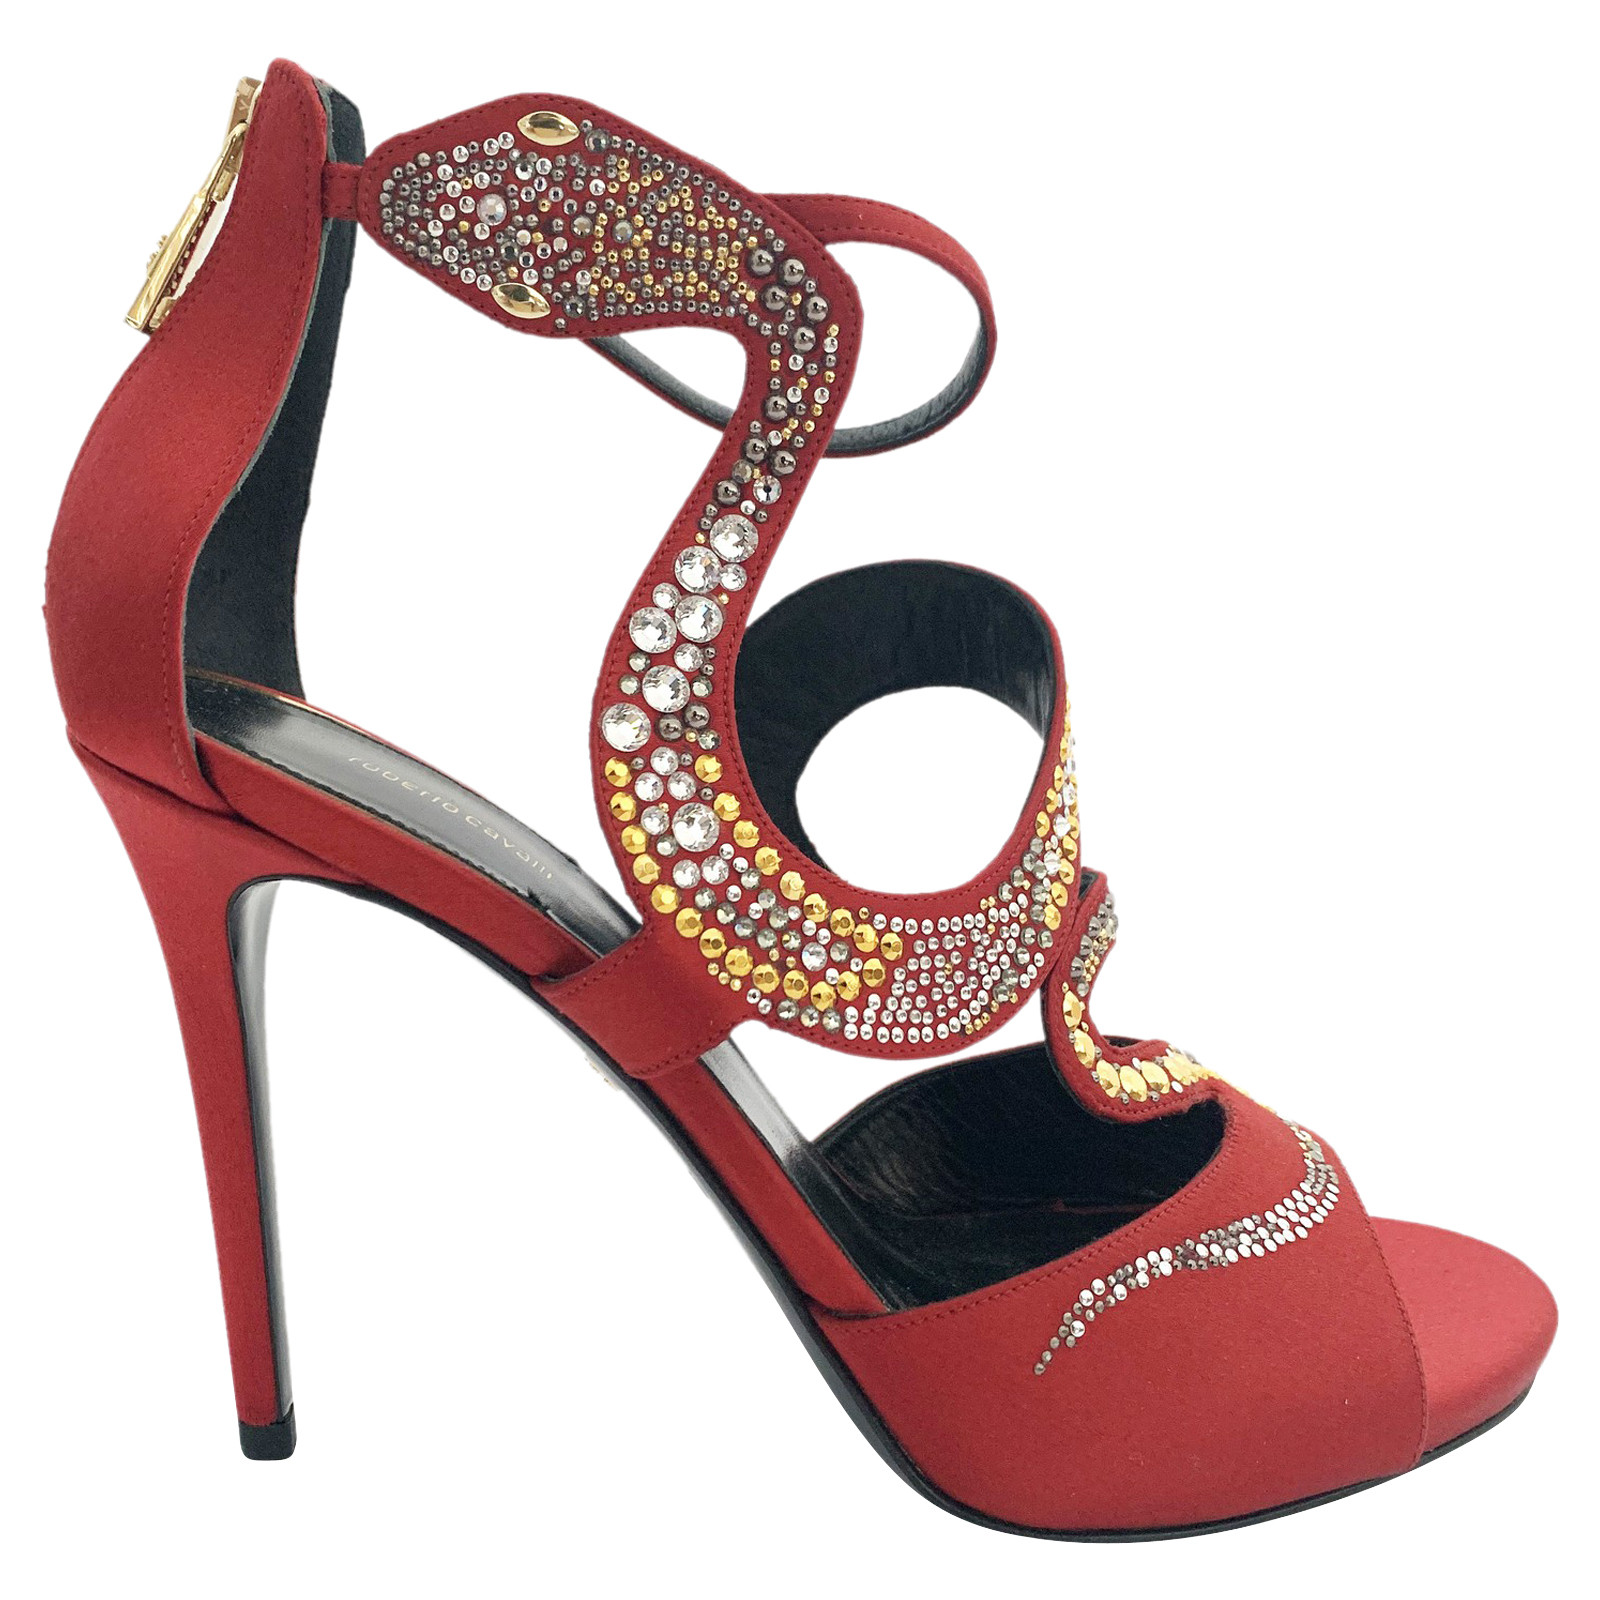 ROBERTO CAVALLI Women's Sandals Leather in Red Size: EU 40